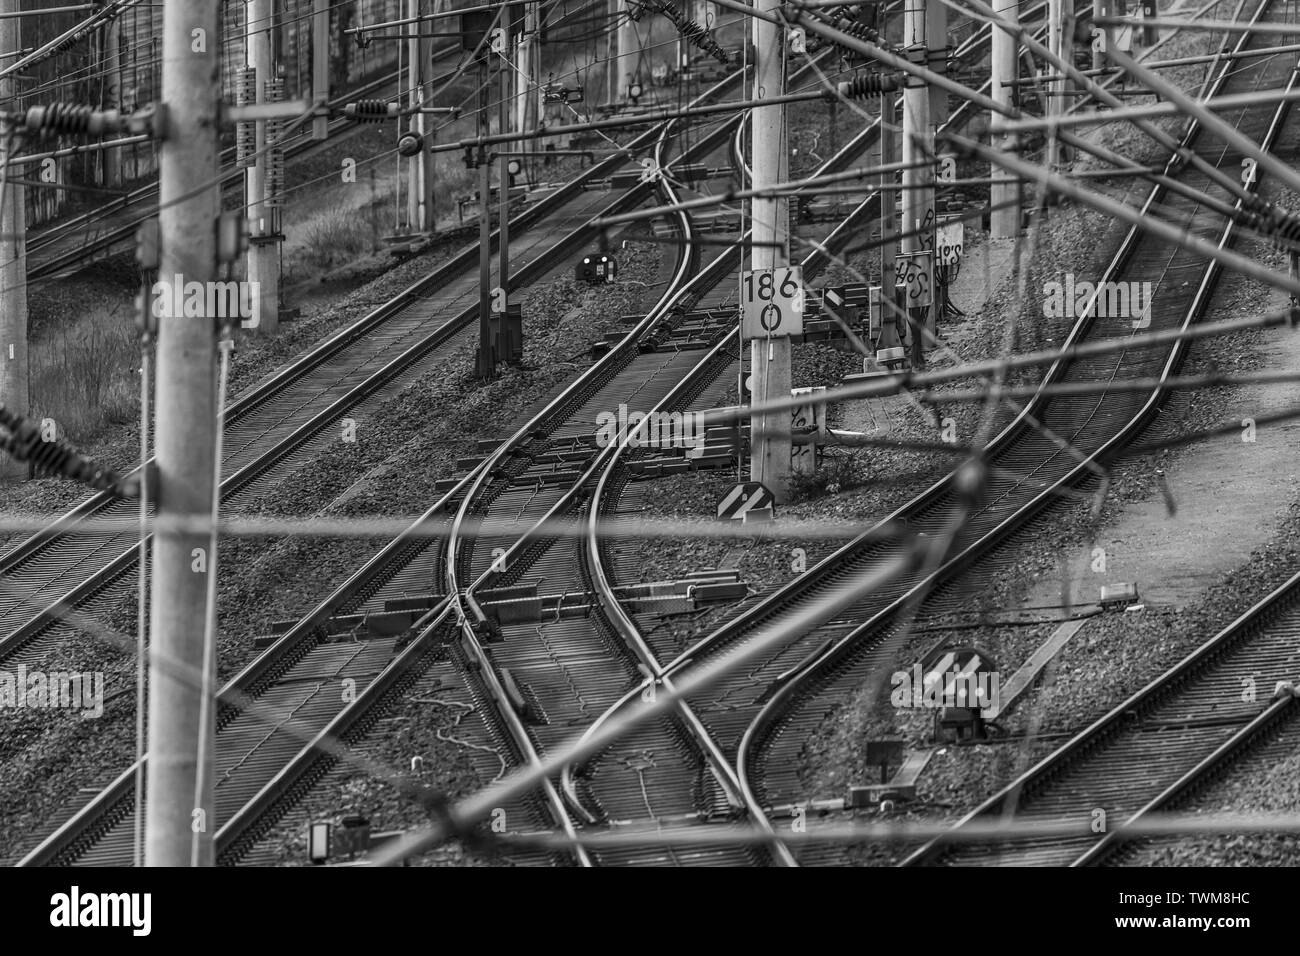 Switches, track systems and overhead lines of a railway line in Germany, monochrome Stock Photo